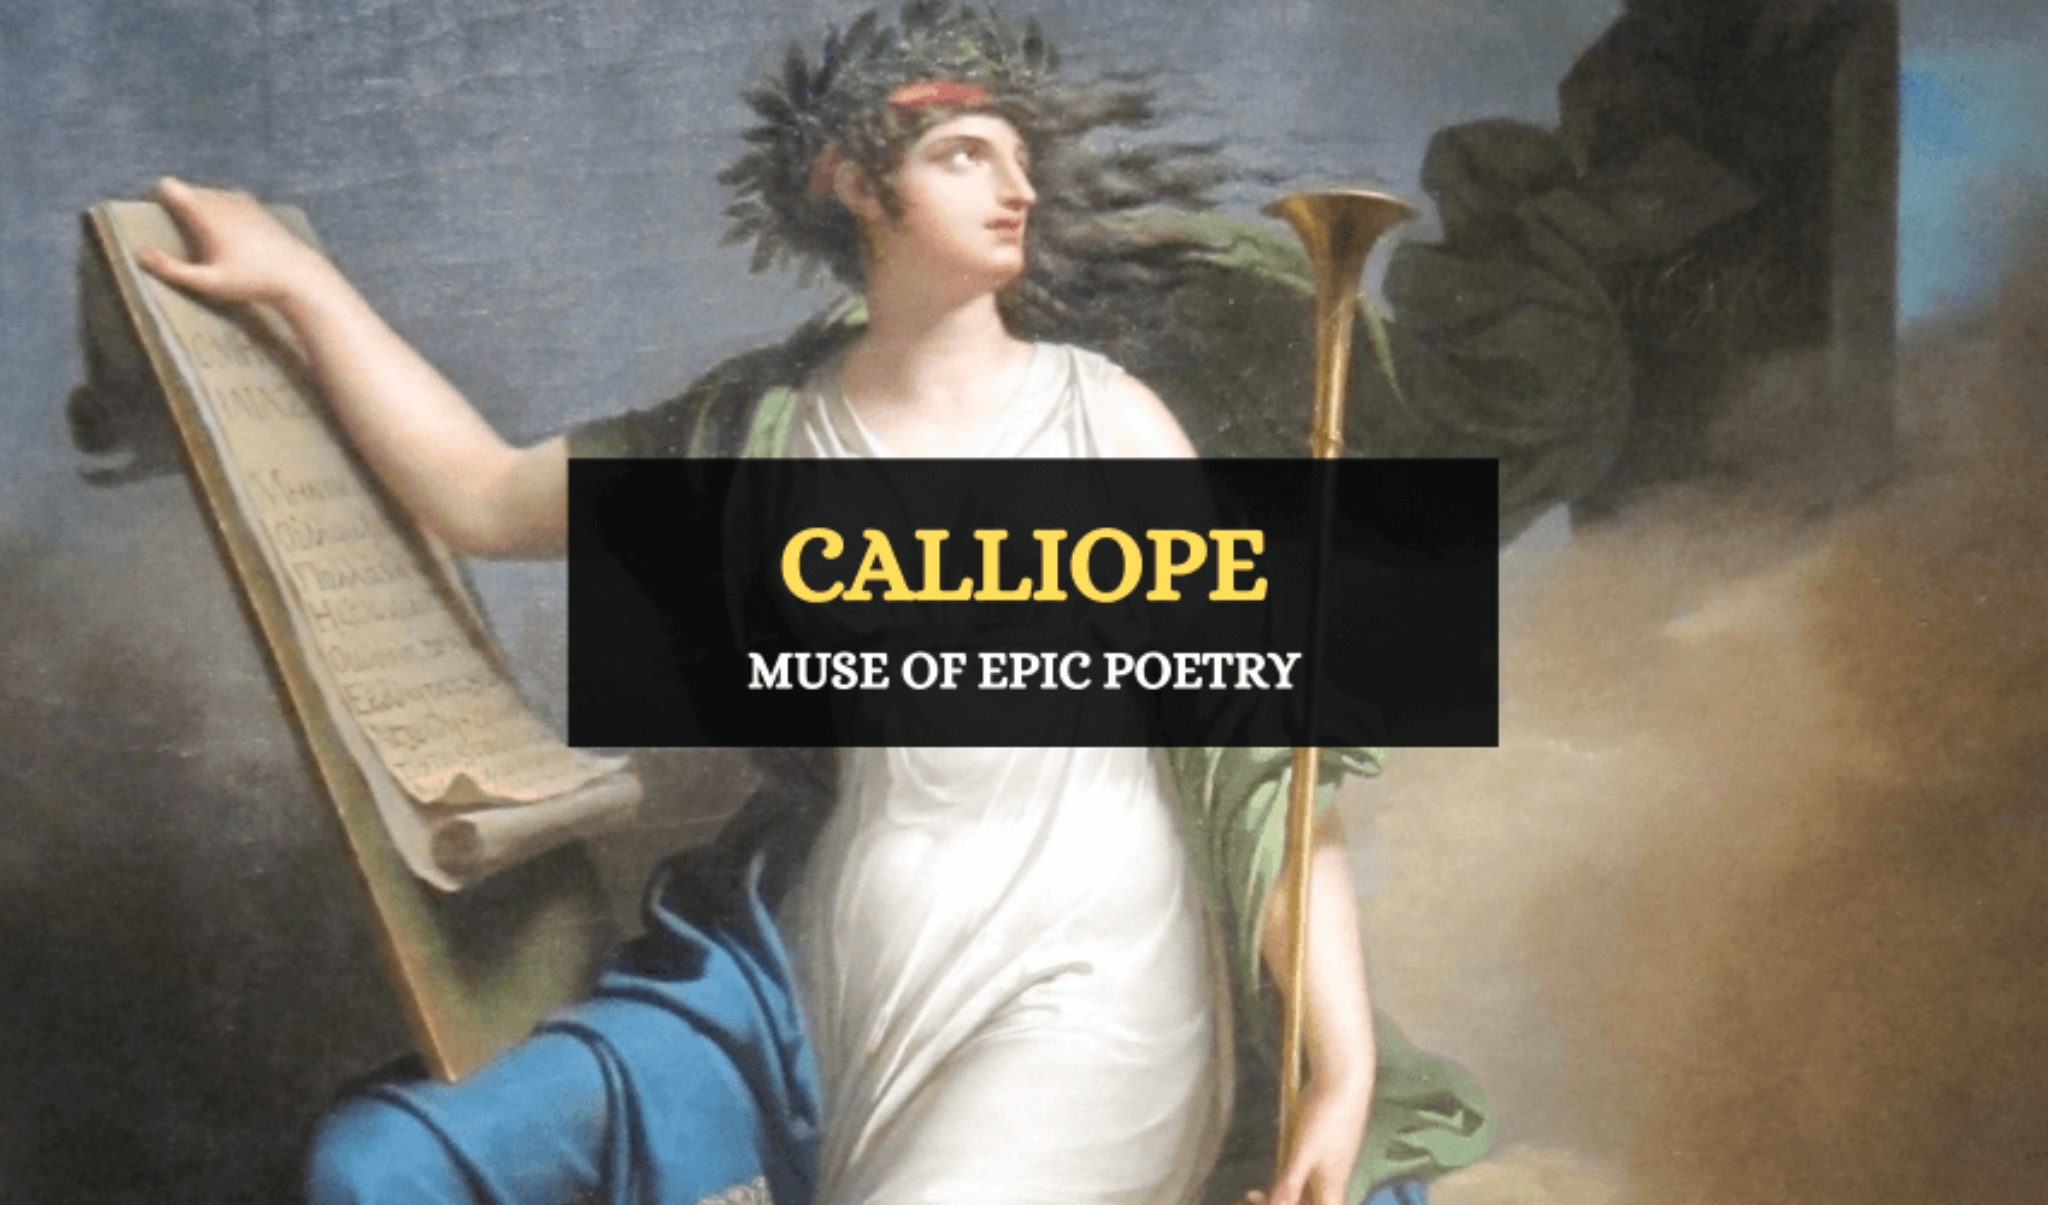 things associated with calliope muse